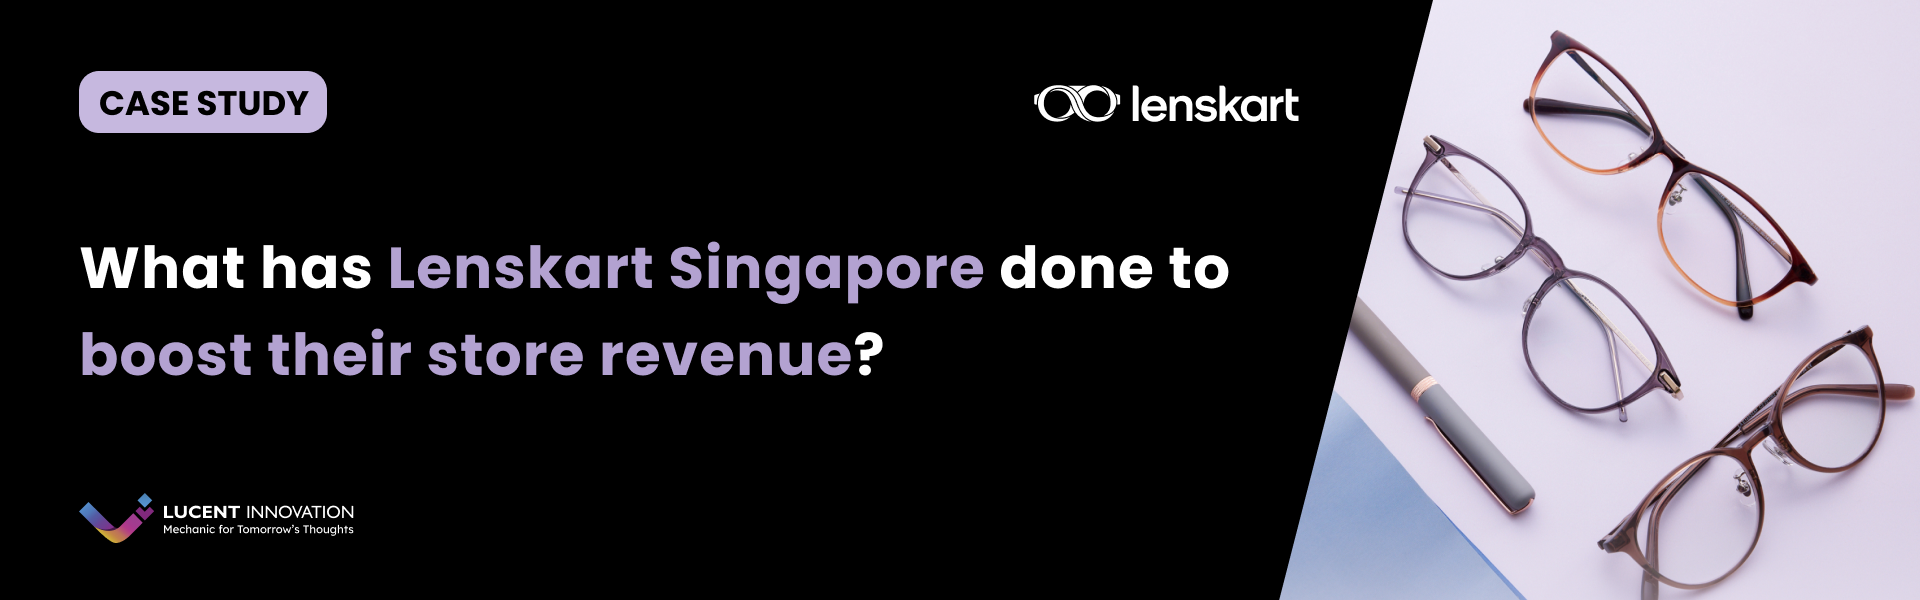 What has Lenskart Singapore done to boost their store revenue?